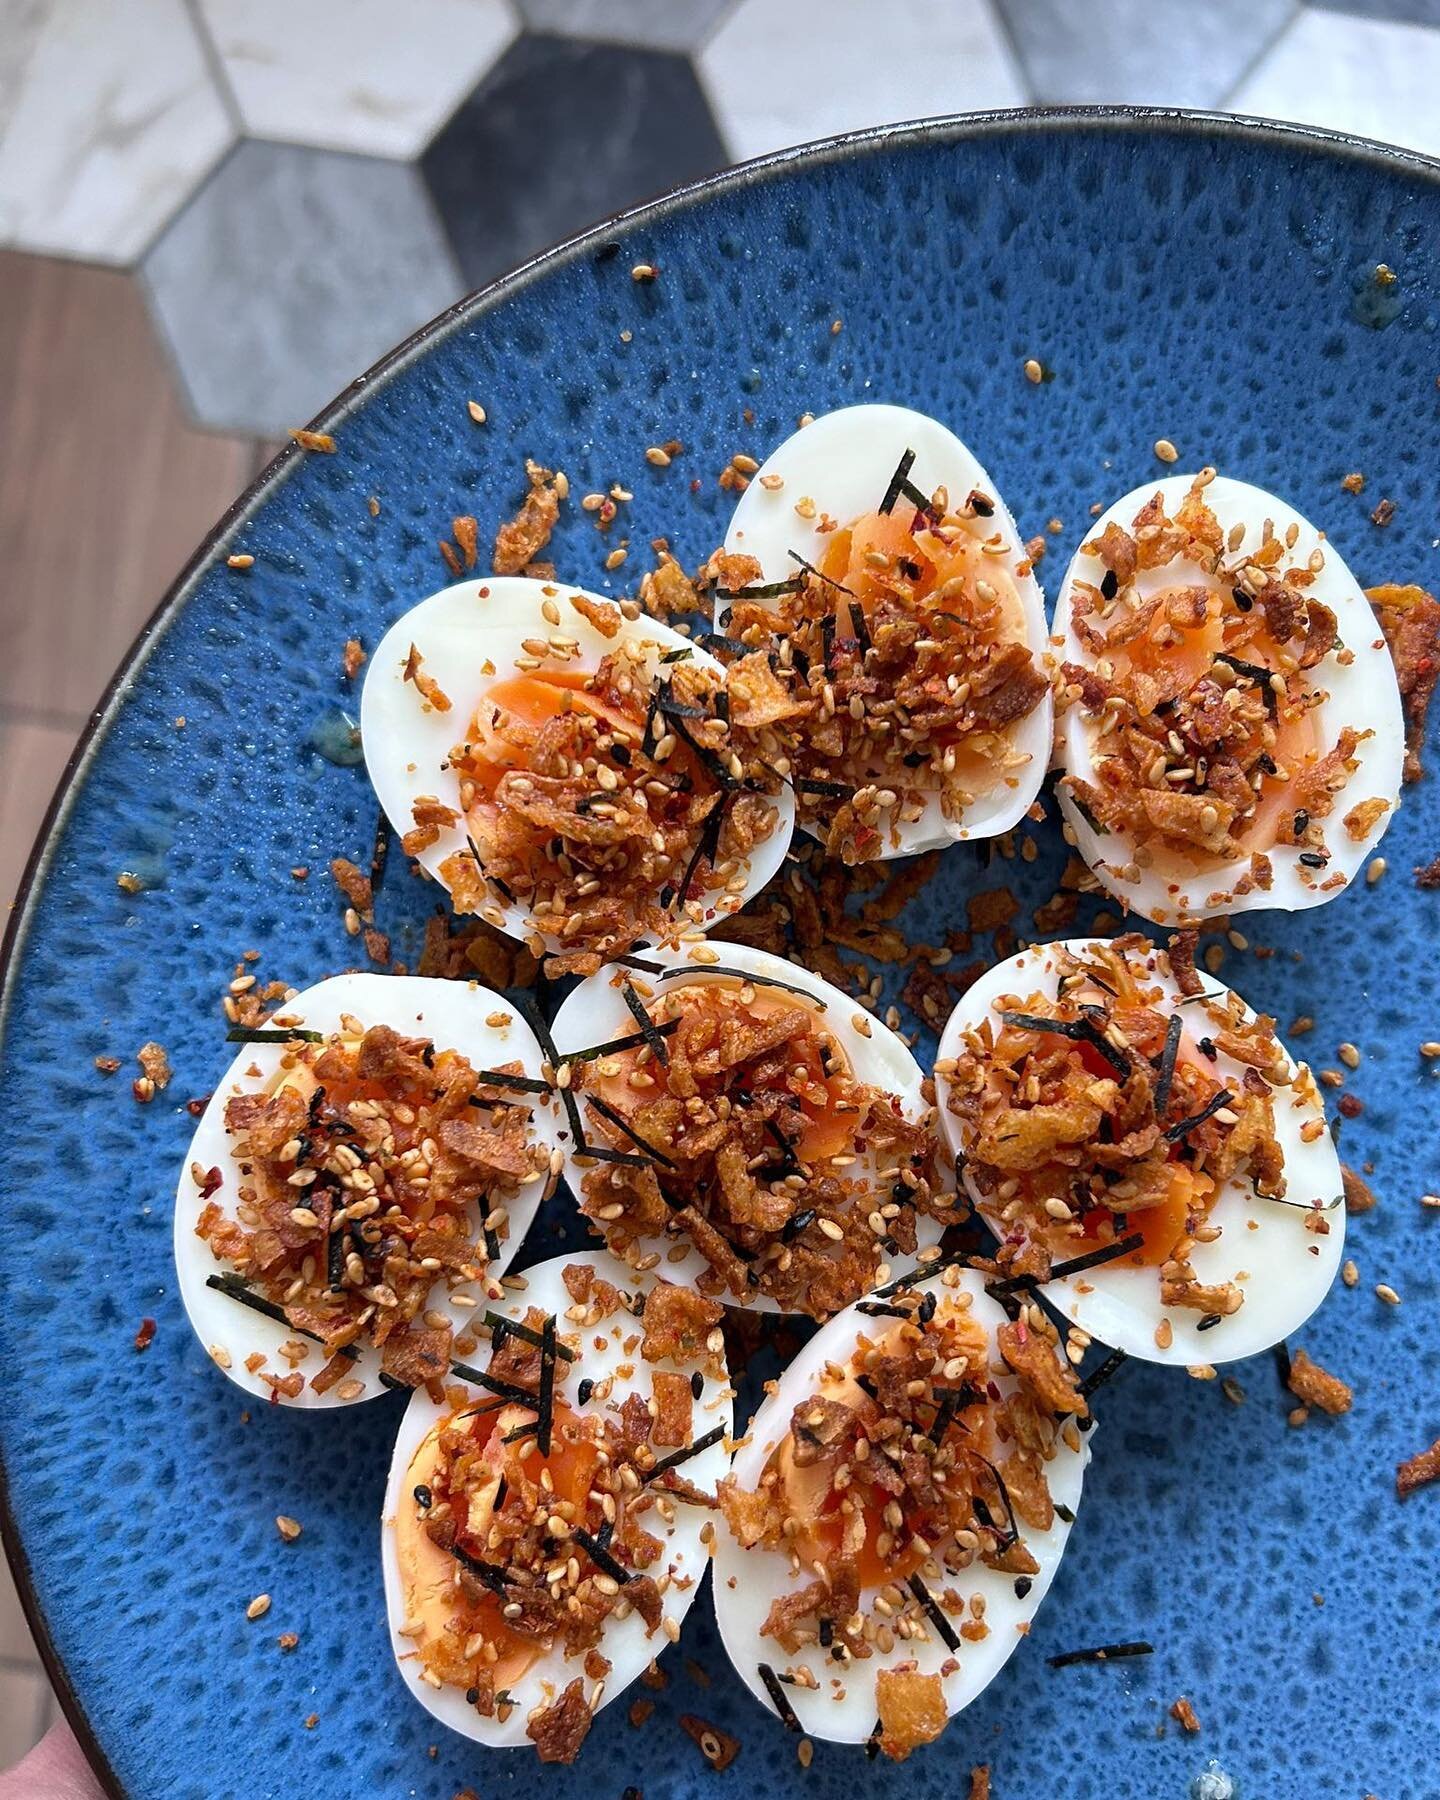 For egg lovers! Eggs + Furikake 🤍

Delicious, crunchy, full of zing, Umami&hellip; simply sexy. 

#furikake #eggs #egglover #japanesefood #wycombemade #delicious #buckinghamshire #madewithlove #handcrafted #spicemakersuk #madeinuk